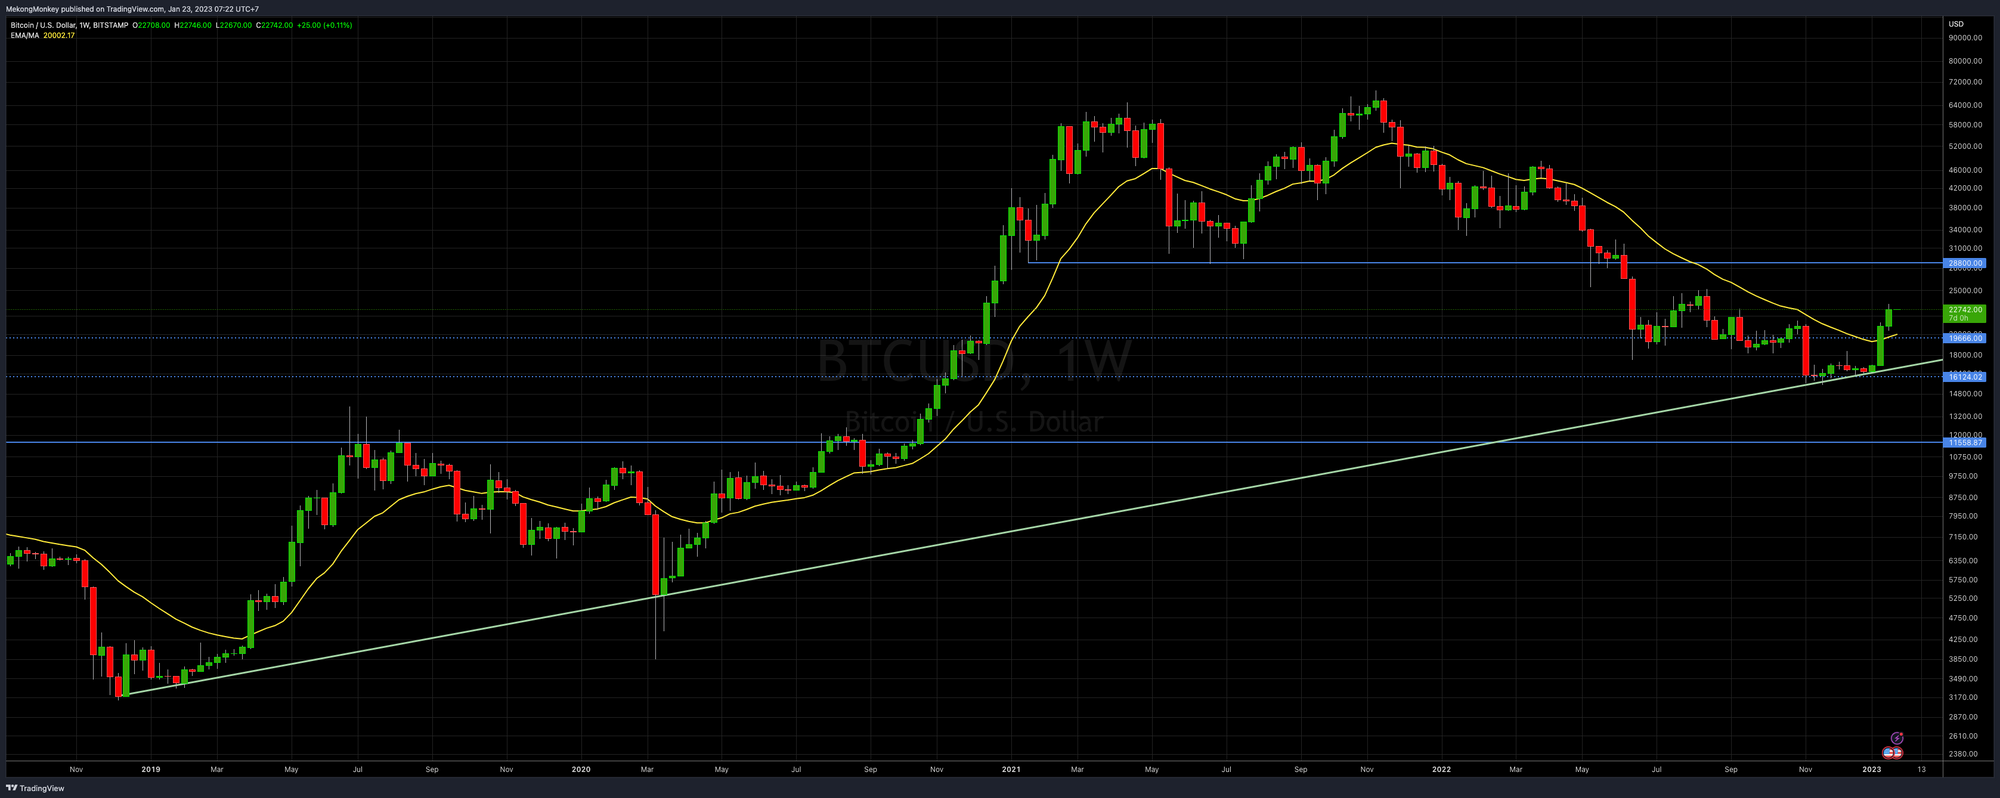 The weekly chart of BTCUSD on Monday, January 23th, 2023